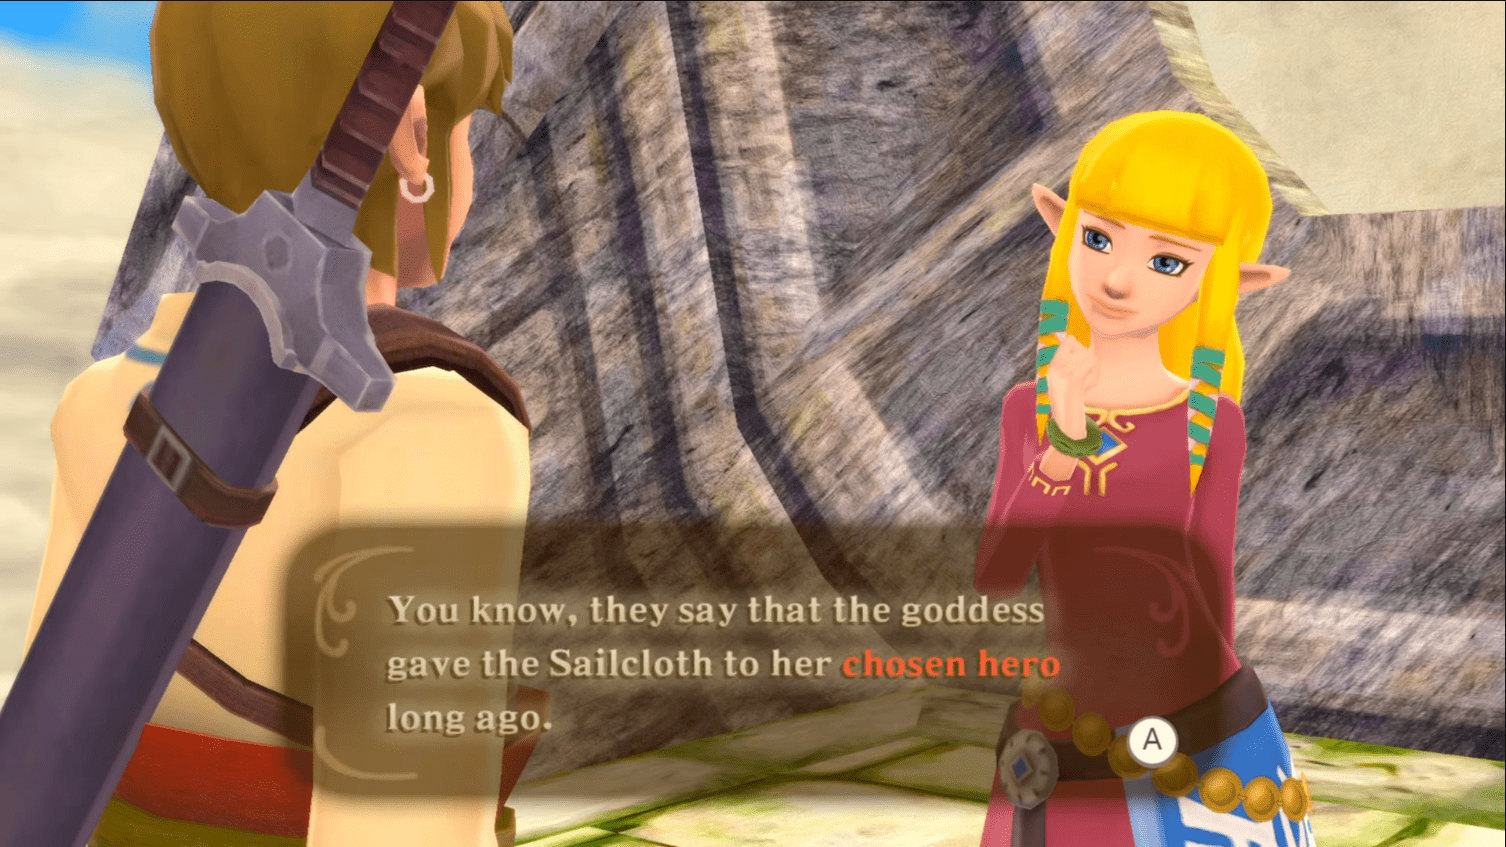 Screenshot from Skyward Sword. You know, they say that the goddess gave the Sailcloth to her chosen hero long ago.